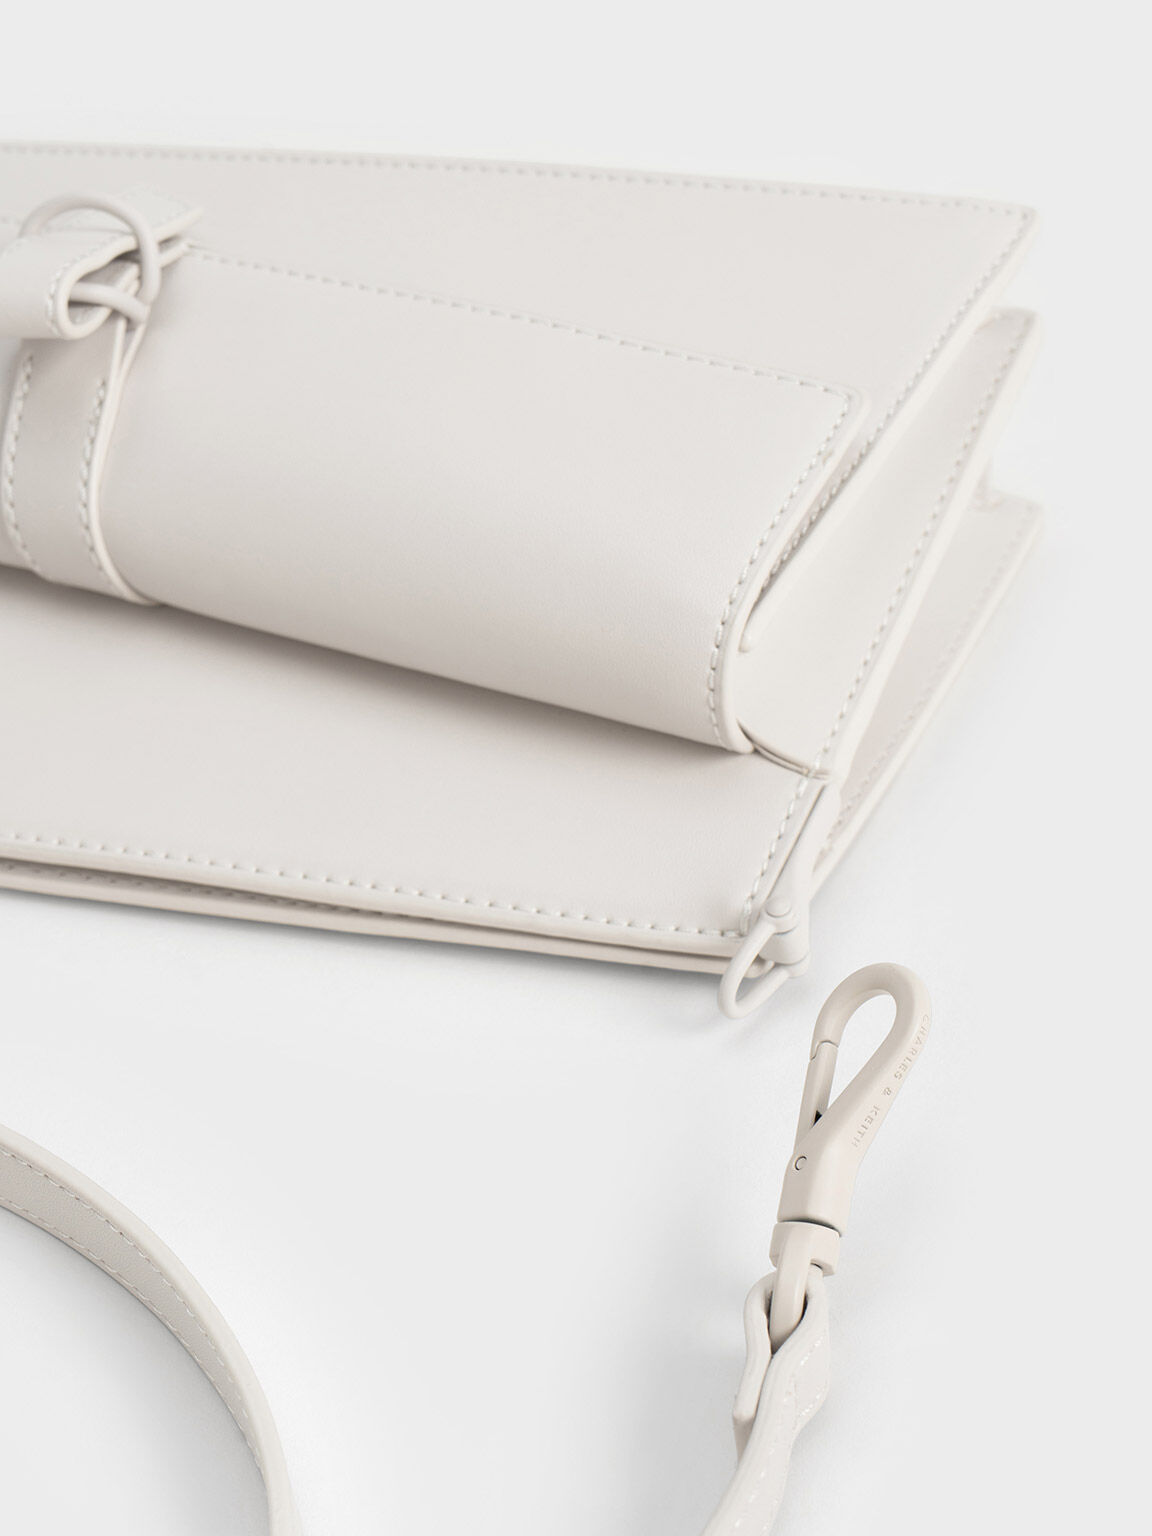 Asymmetric Belted Trapeze Bag, White, hi-res